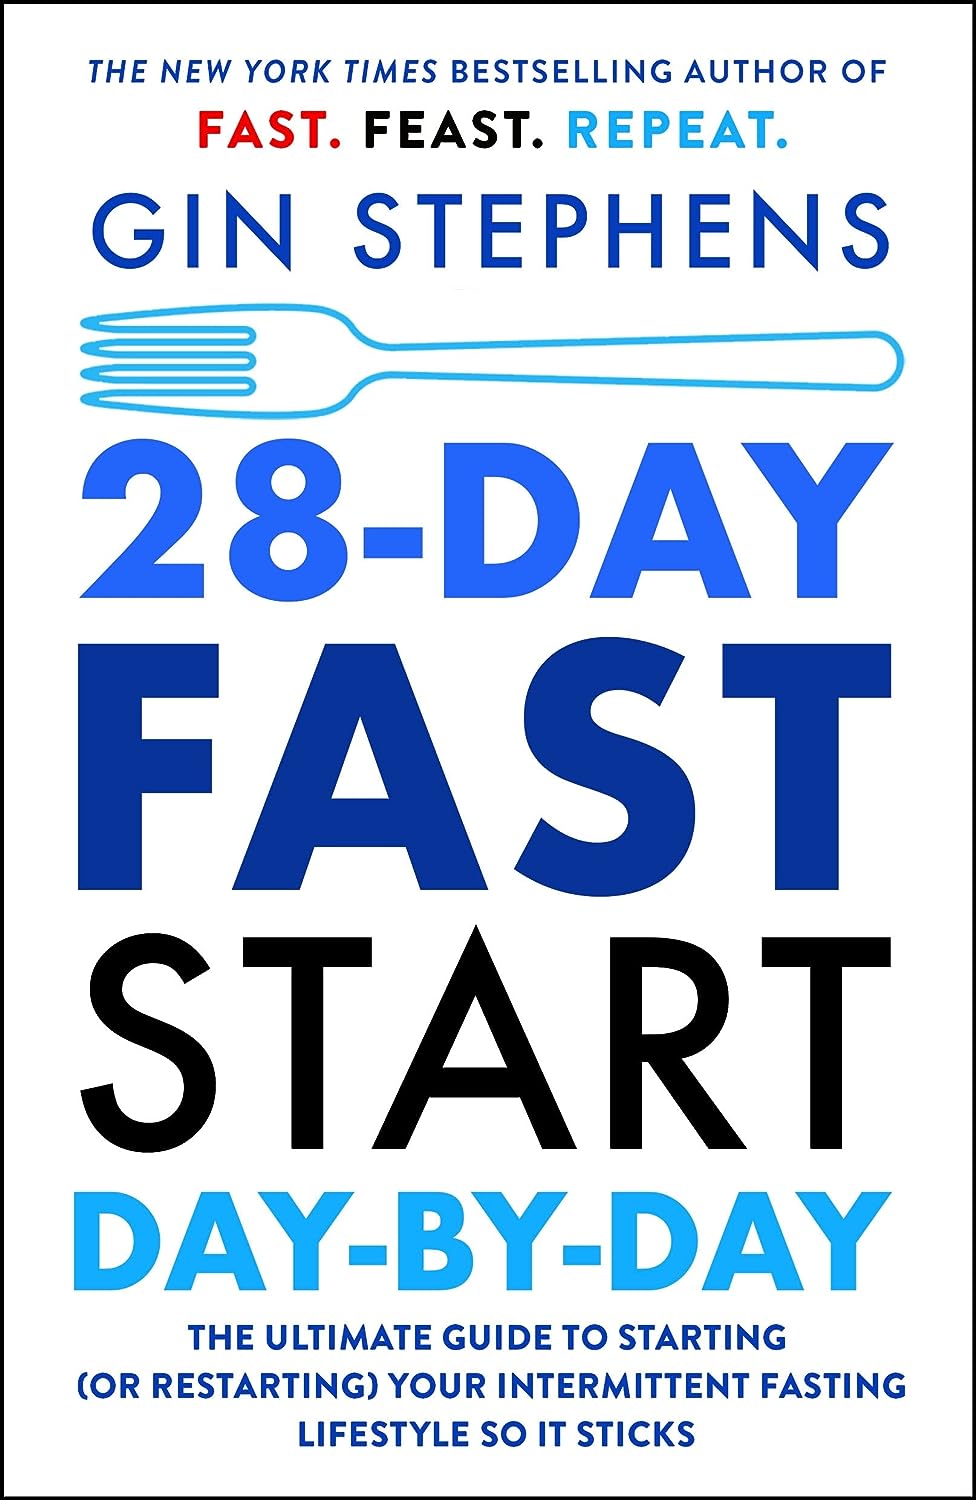 28-Day Fast Start Day-By-Day: The Ultimate Guide to Starting (or Restarting) Your Intermittent Fasting Lifestyle So It Sticks - SureShot Books Publishing LLC